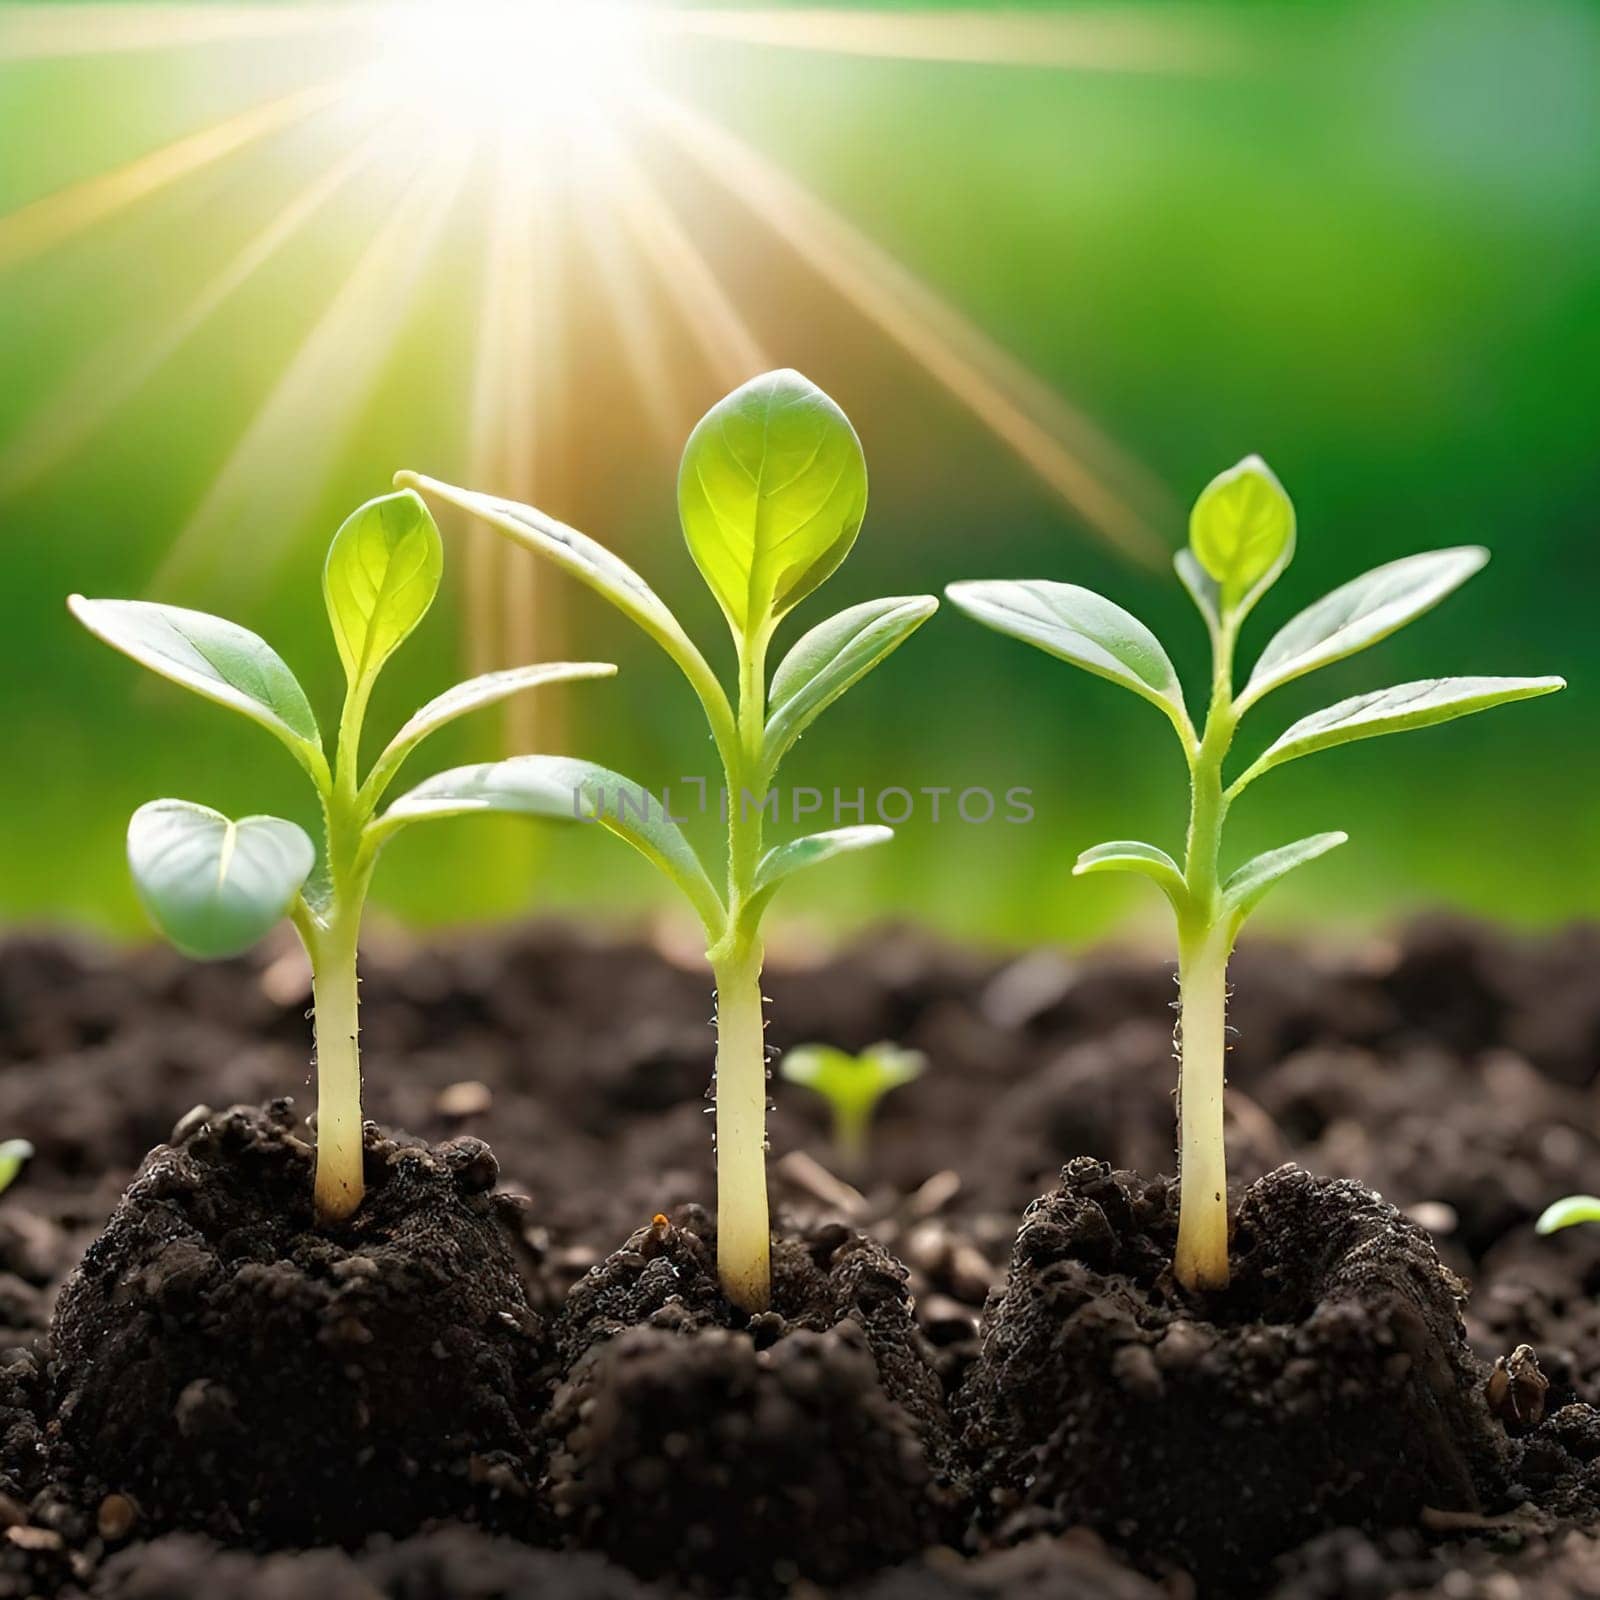 Green plant seedling illustrating concept of new life and environmental conservation.Green seedling illustrating concept of new life and development. Sprout growing from seed.Green seedling illustrating concept of new life and investment in green business.